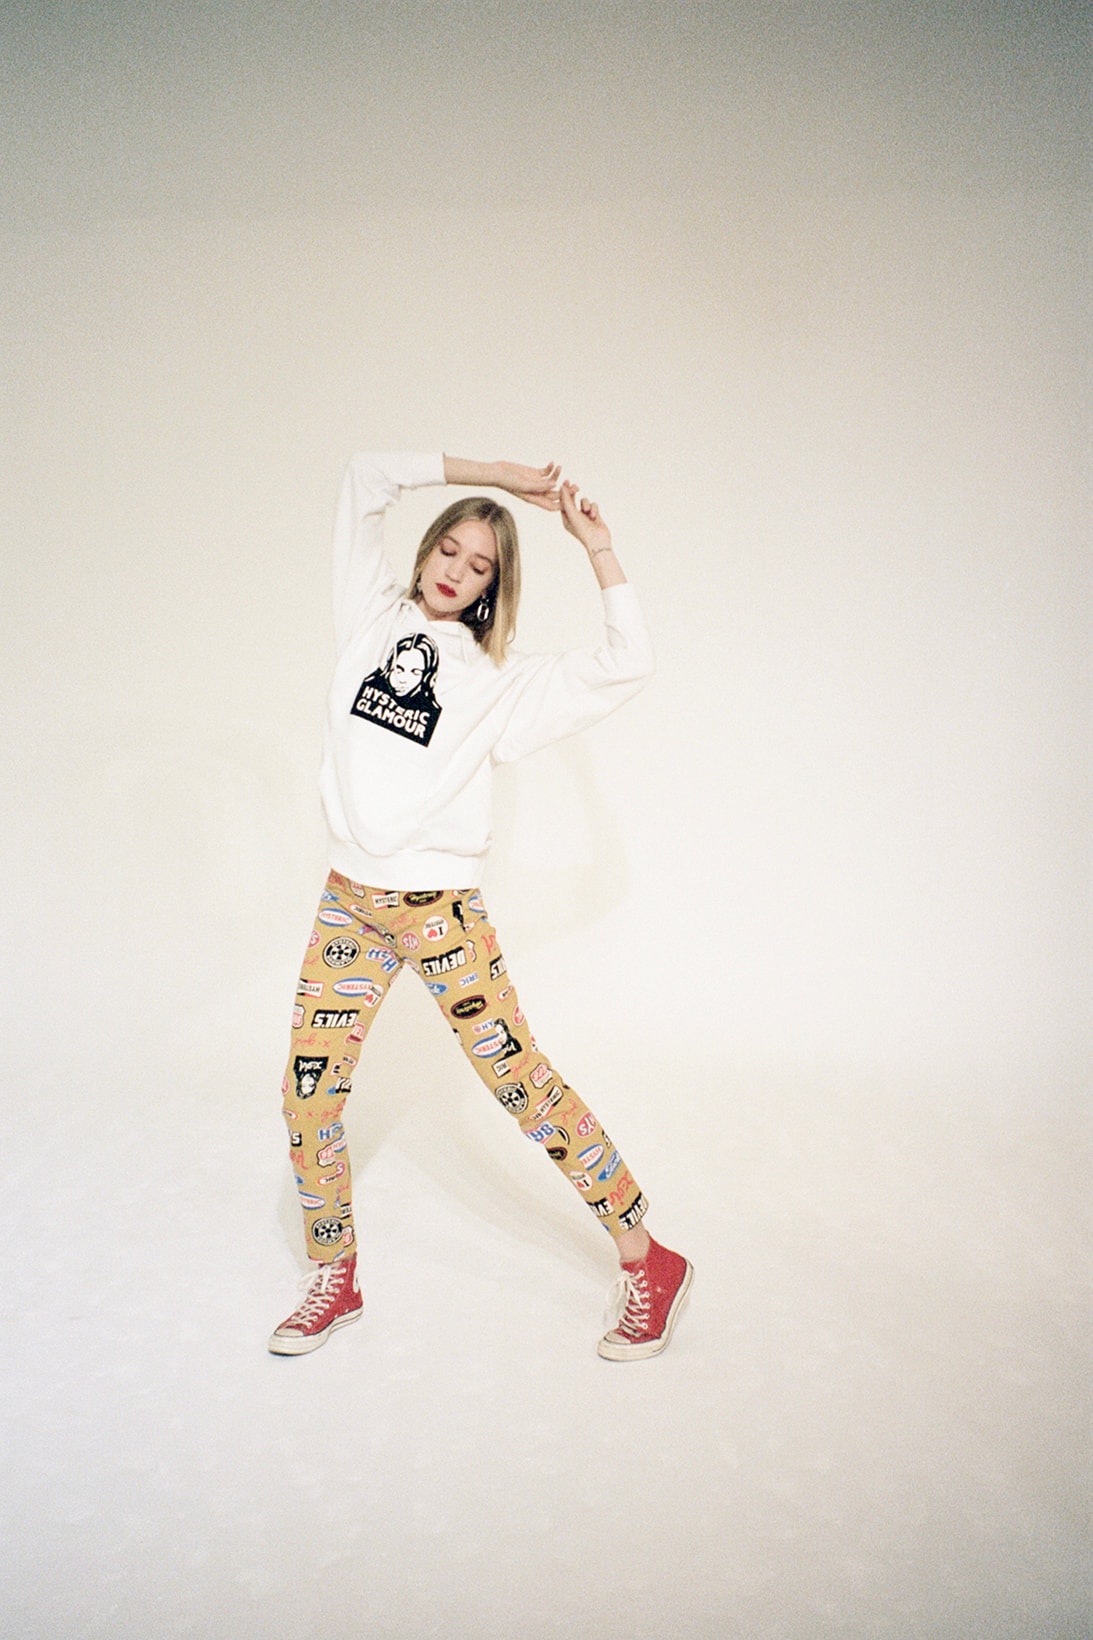 x girl hysteric glamour collaboration dover street market london coco gordon moore lookbook white hoodie yellow mustard pants red converse